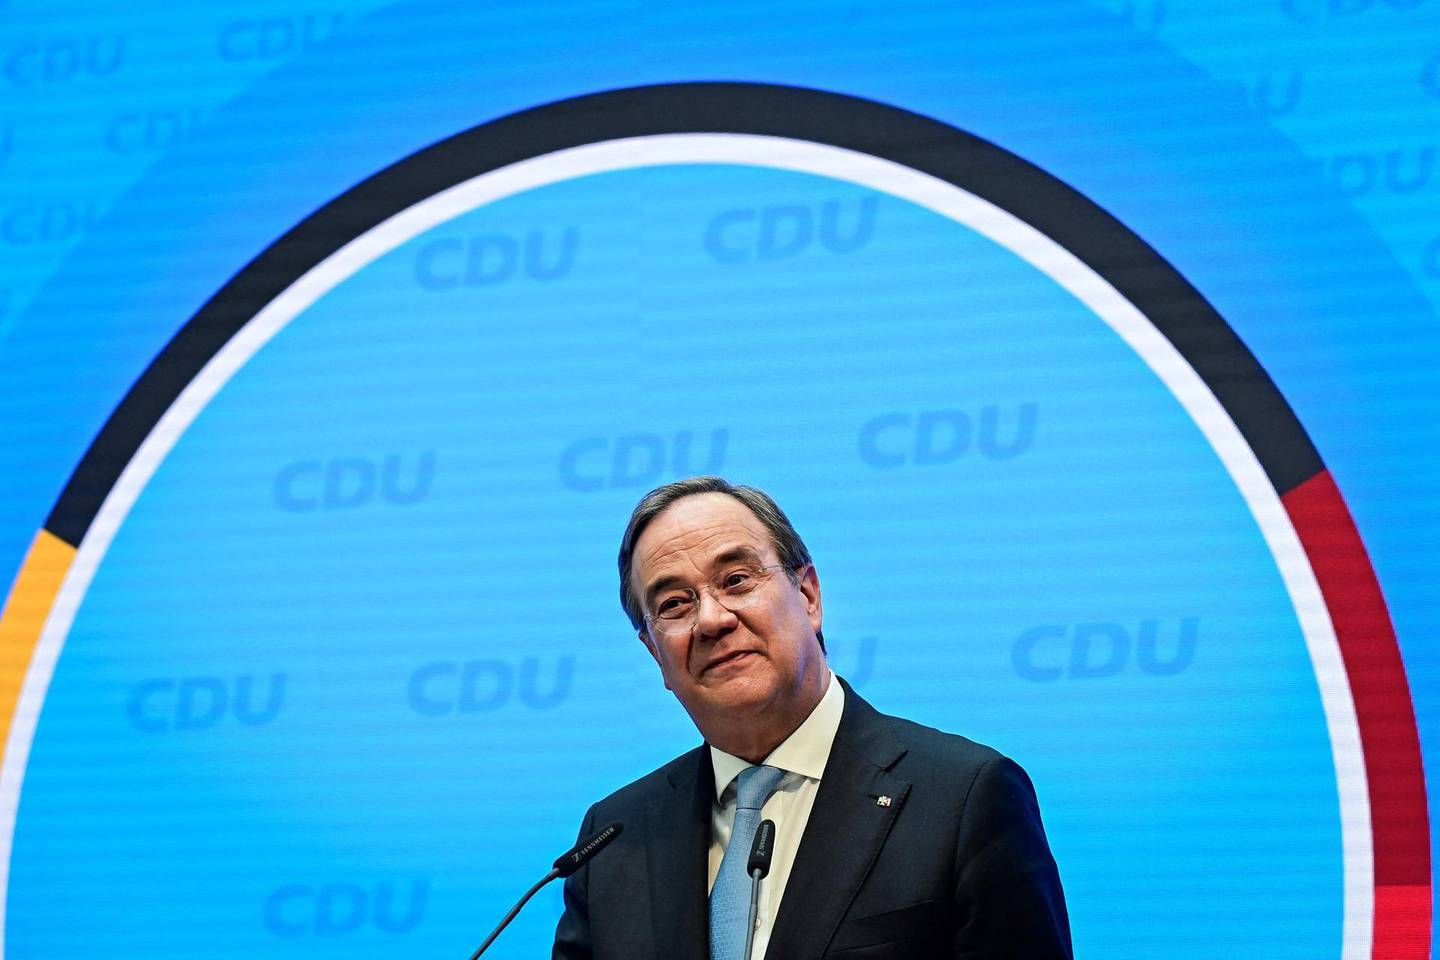 (FILES) In this file photo taken on April 20, 2021 North Rhine-Westphalia's State Premier and head of Germany's conservative Christian Democratic Union (CDU) party Armin Laschet gives a press conference at the headquaters of the conservative Christian Democratic Union (CDU) party in Berlin. A sea change in German politics began this week with two leading parties announcing their candidates to succeed Angela Merkel at September's elections, when the veteran chancellor will bow out from politics. After 16 years with Merkel at the helm of Europe's largest economy, politics in steady-as-it-goes Germany is entering a period of unpredictability. / AFP / POOL / Tobias SCHWARZ
